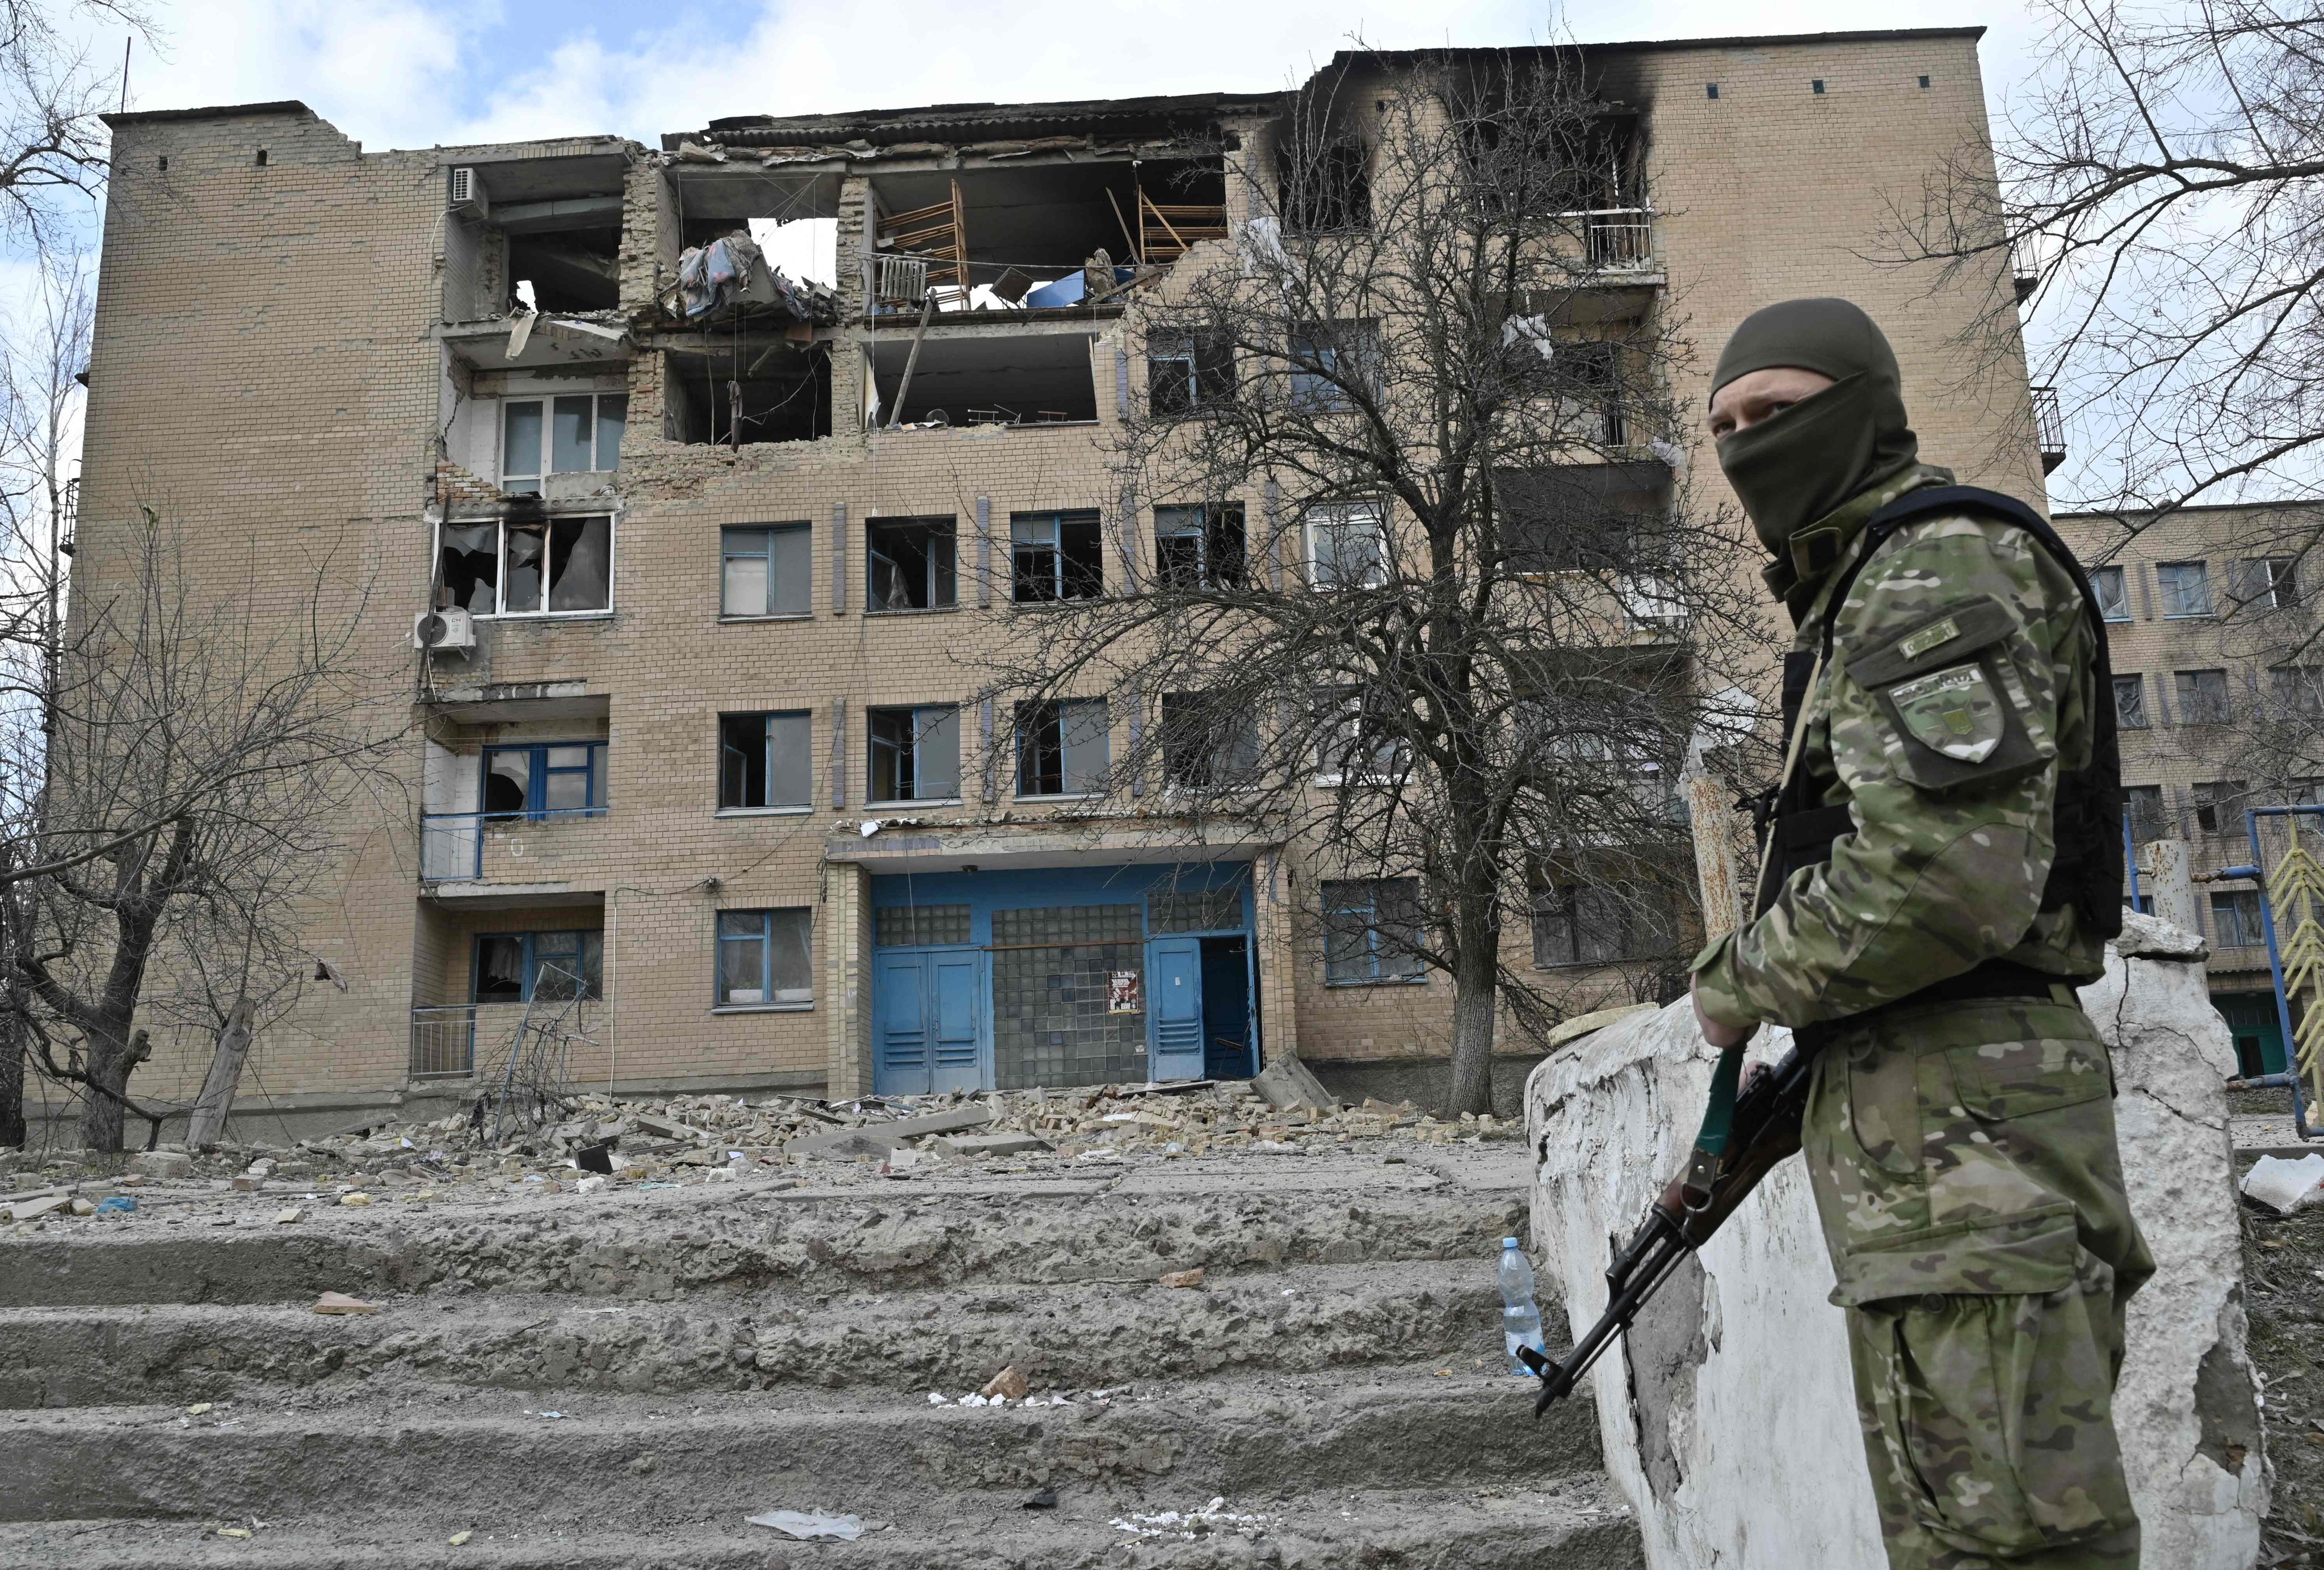 A Ukrainian police officer stands in front of a building hit by an air strike in the town of Rzhyshchiv, near Kyiv, on Wednesday, amid the Russian invasion of Ukraine. Photo: AFP